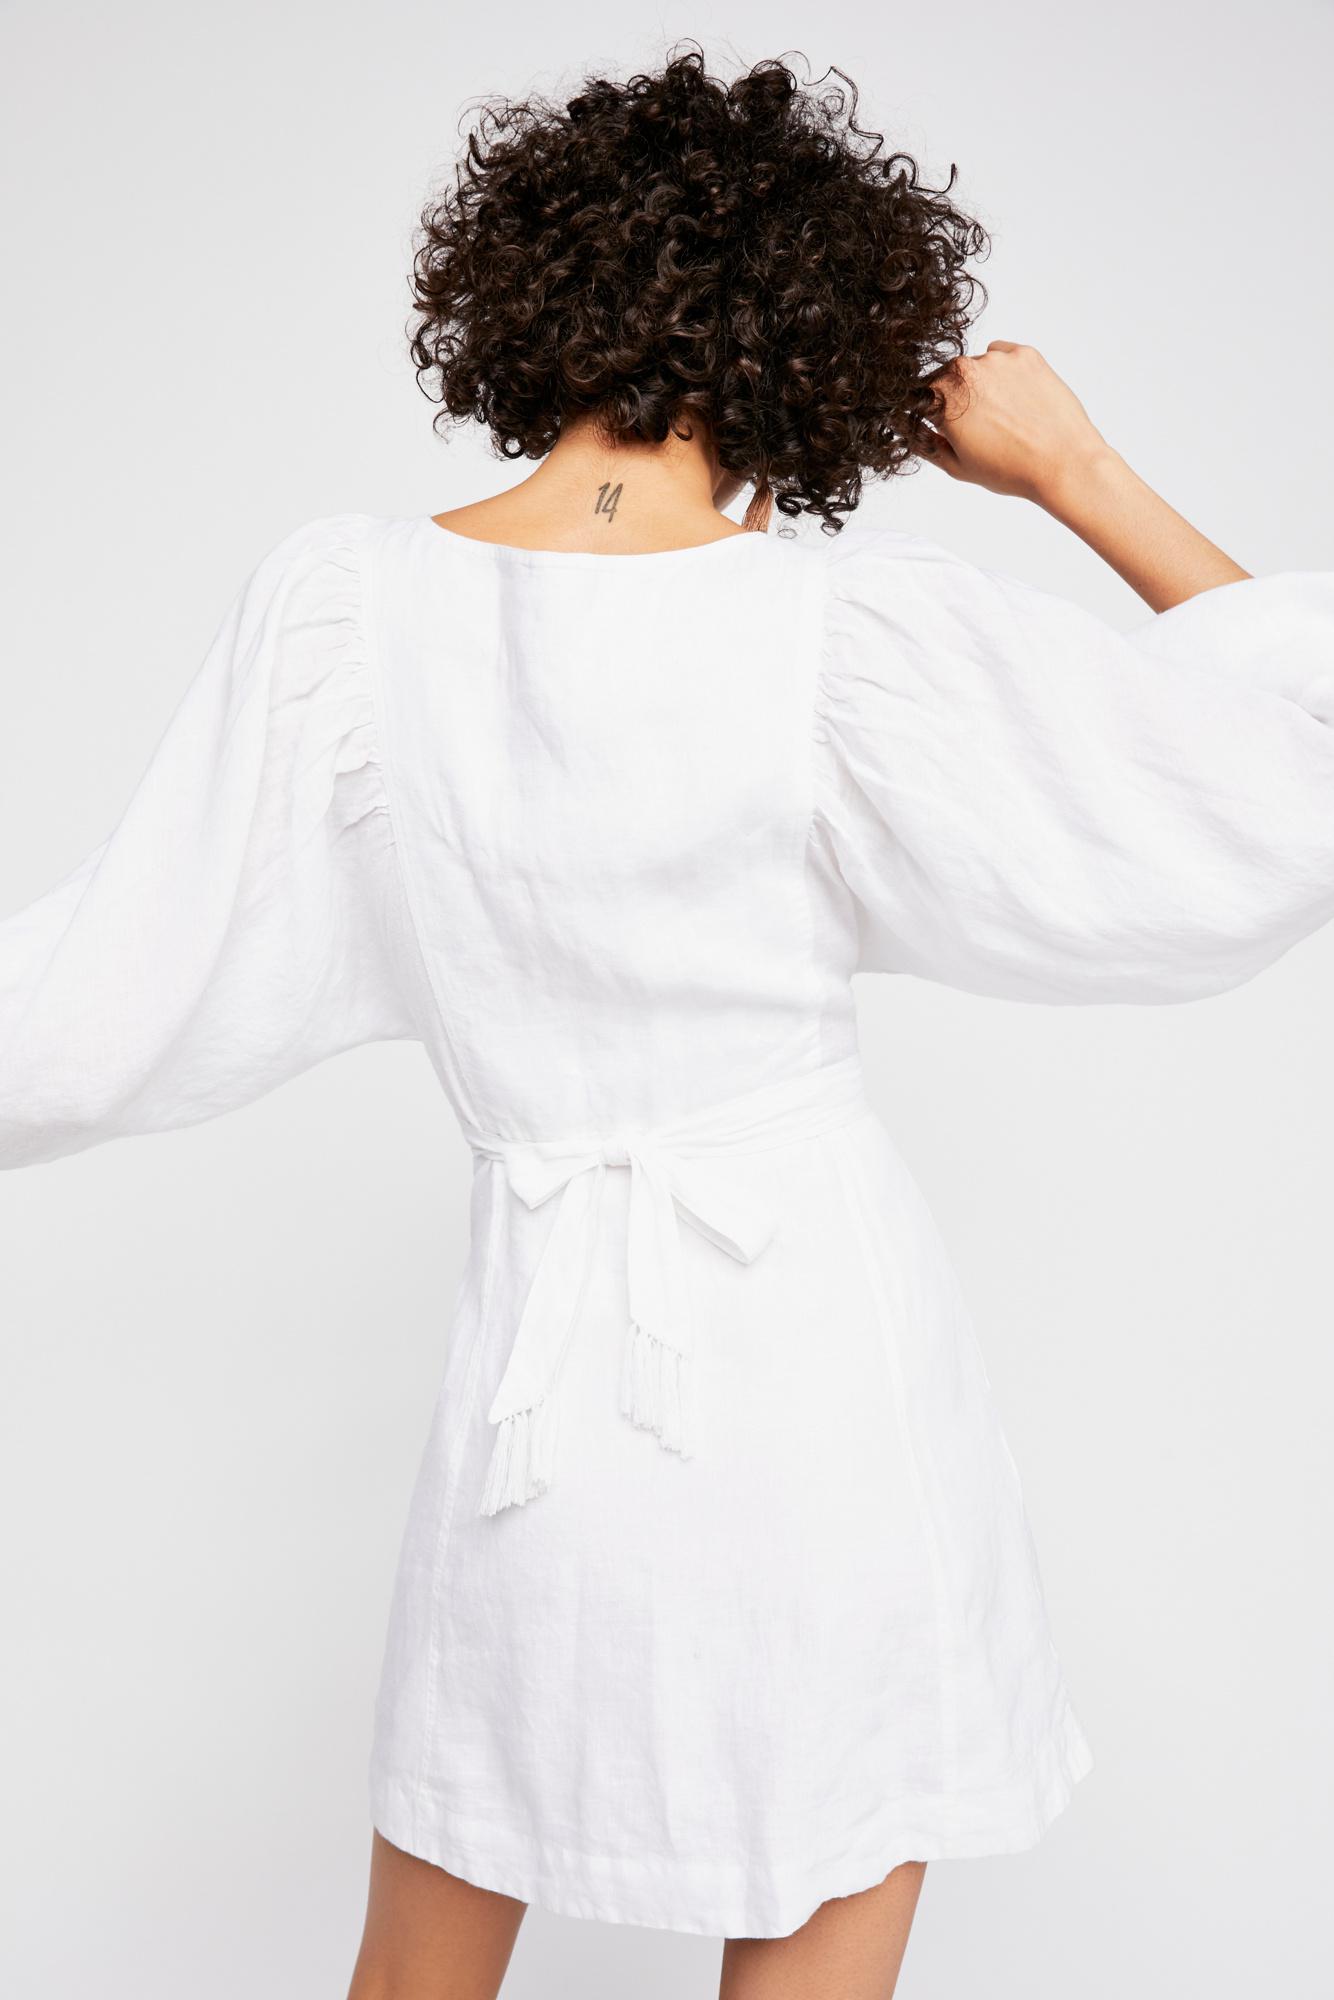 Free People Linen Carino Mini Dress By Endless Summer in White - Lyst